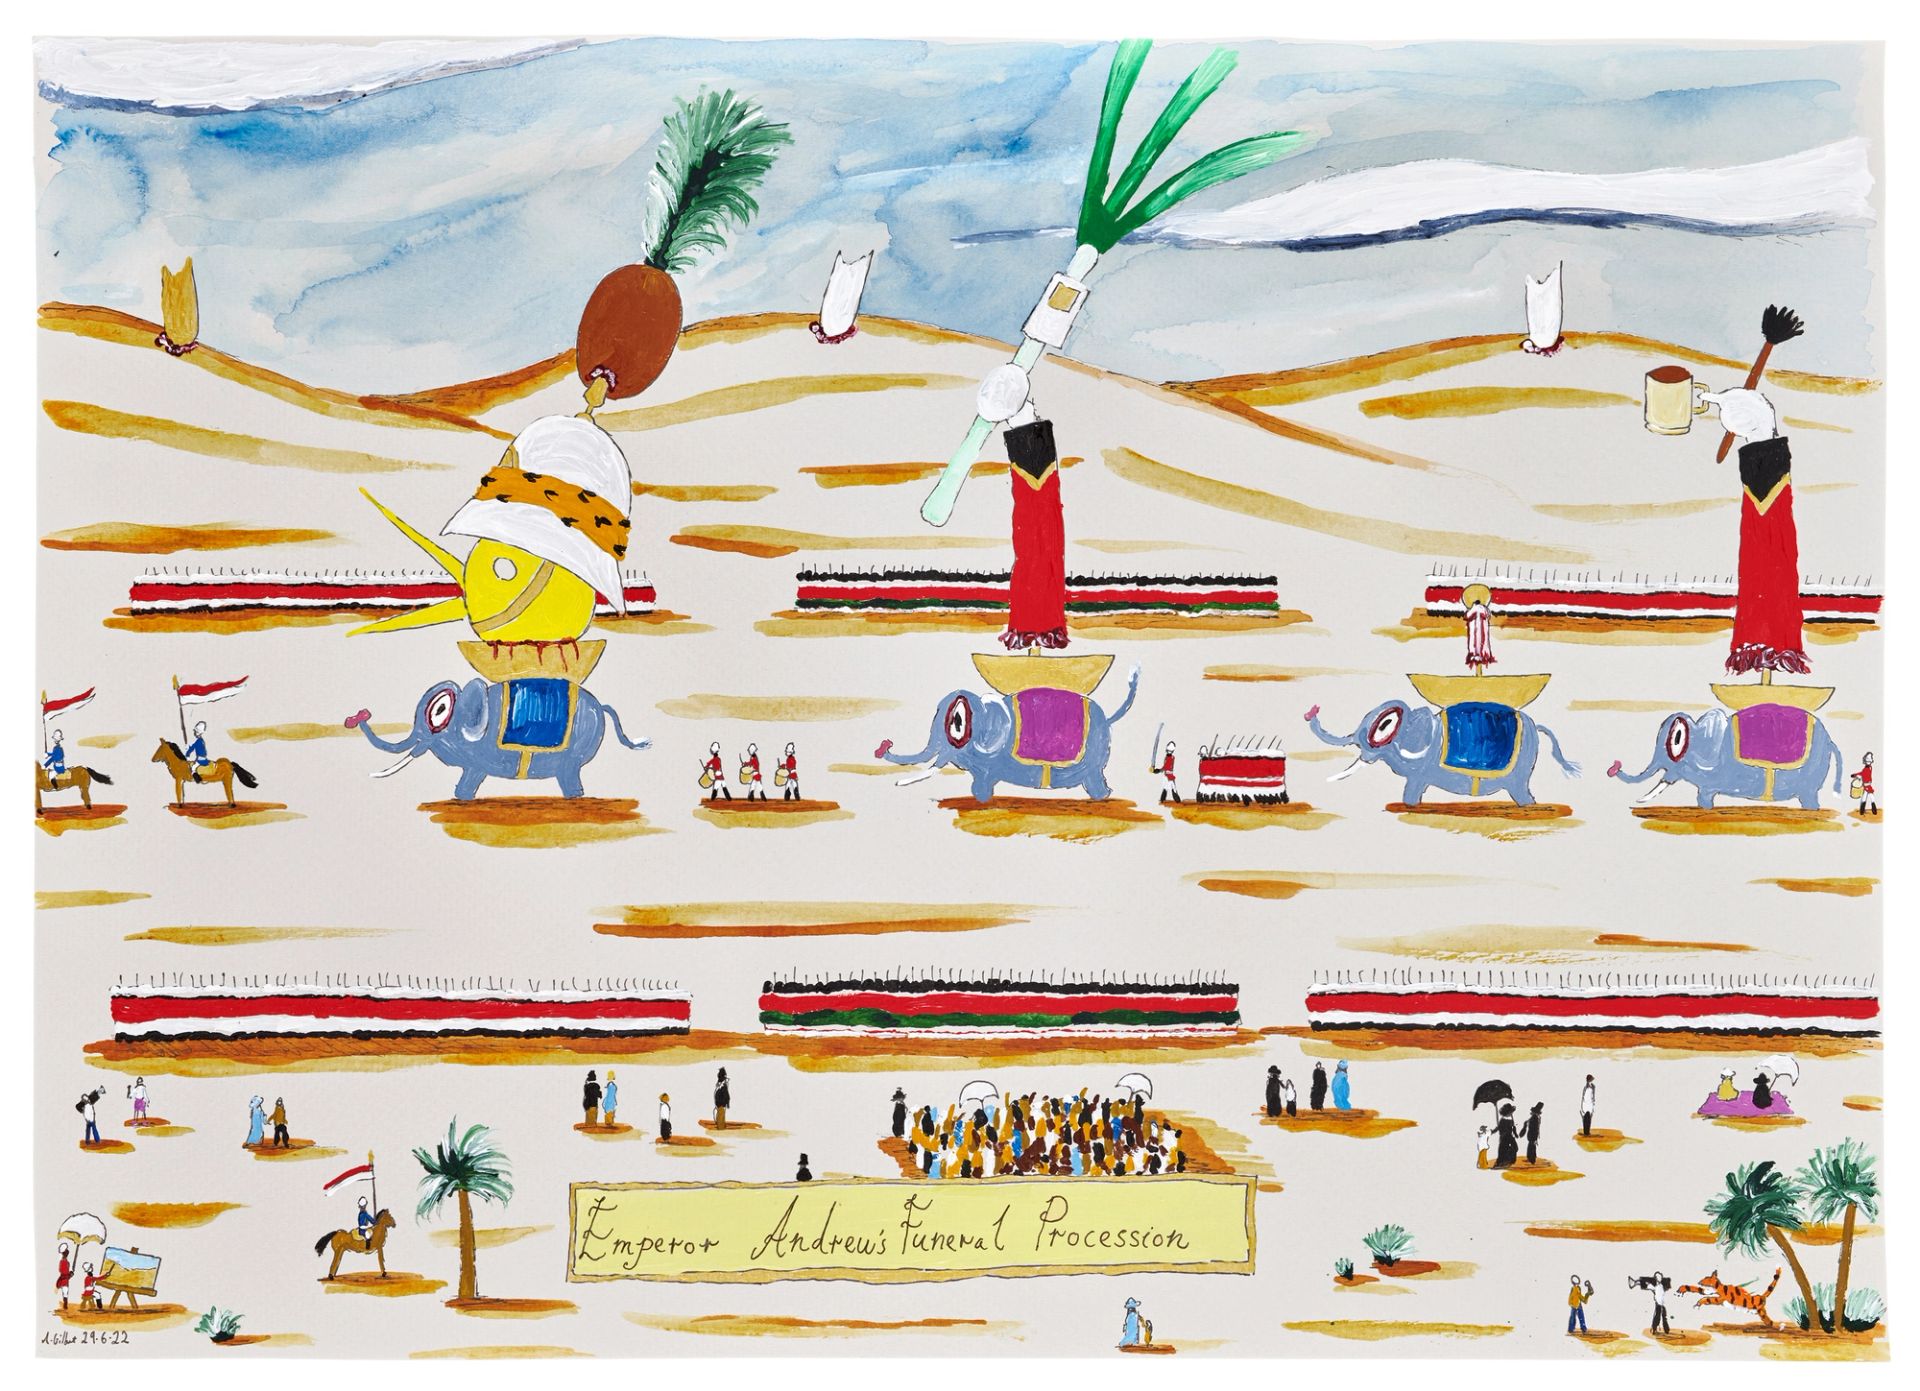 Andrew Gilbert, 'Emperor Andrew's Funeral Procession', 2022, acrylic, fineliner and watercolor on paper, 29.5 × 41.5 cm